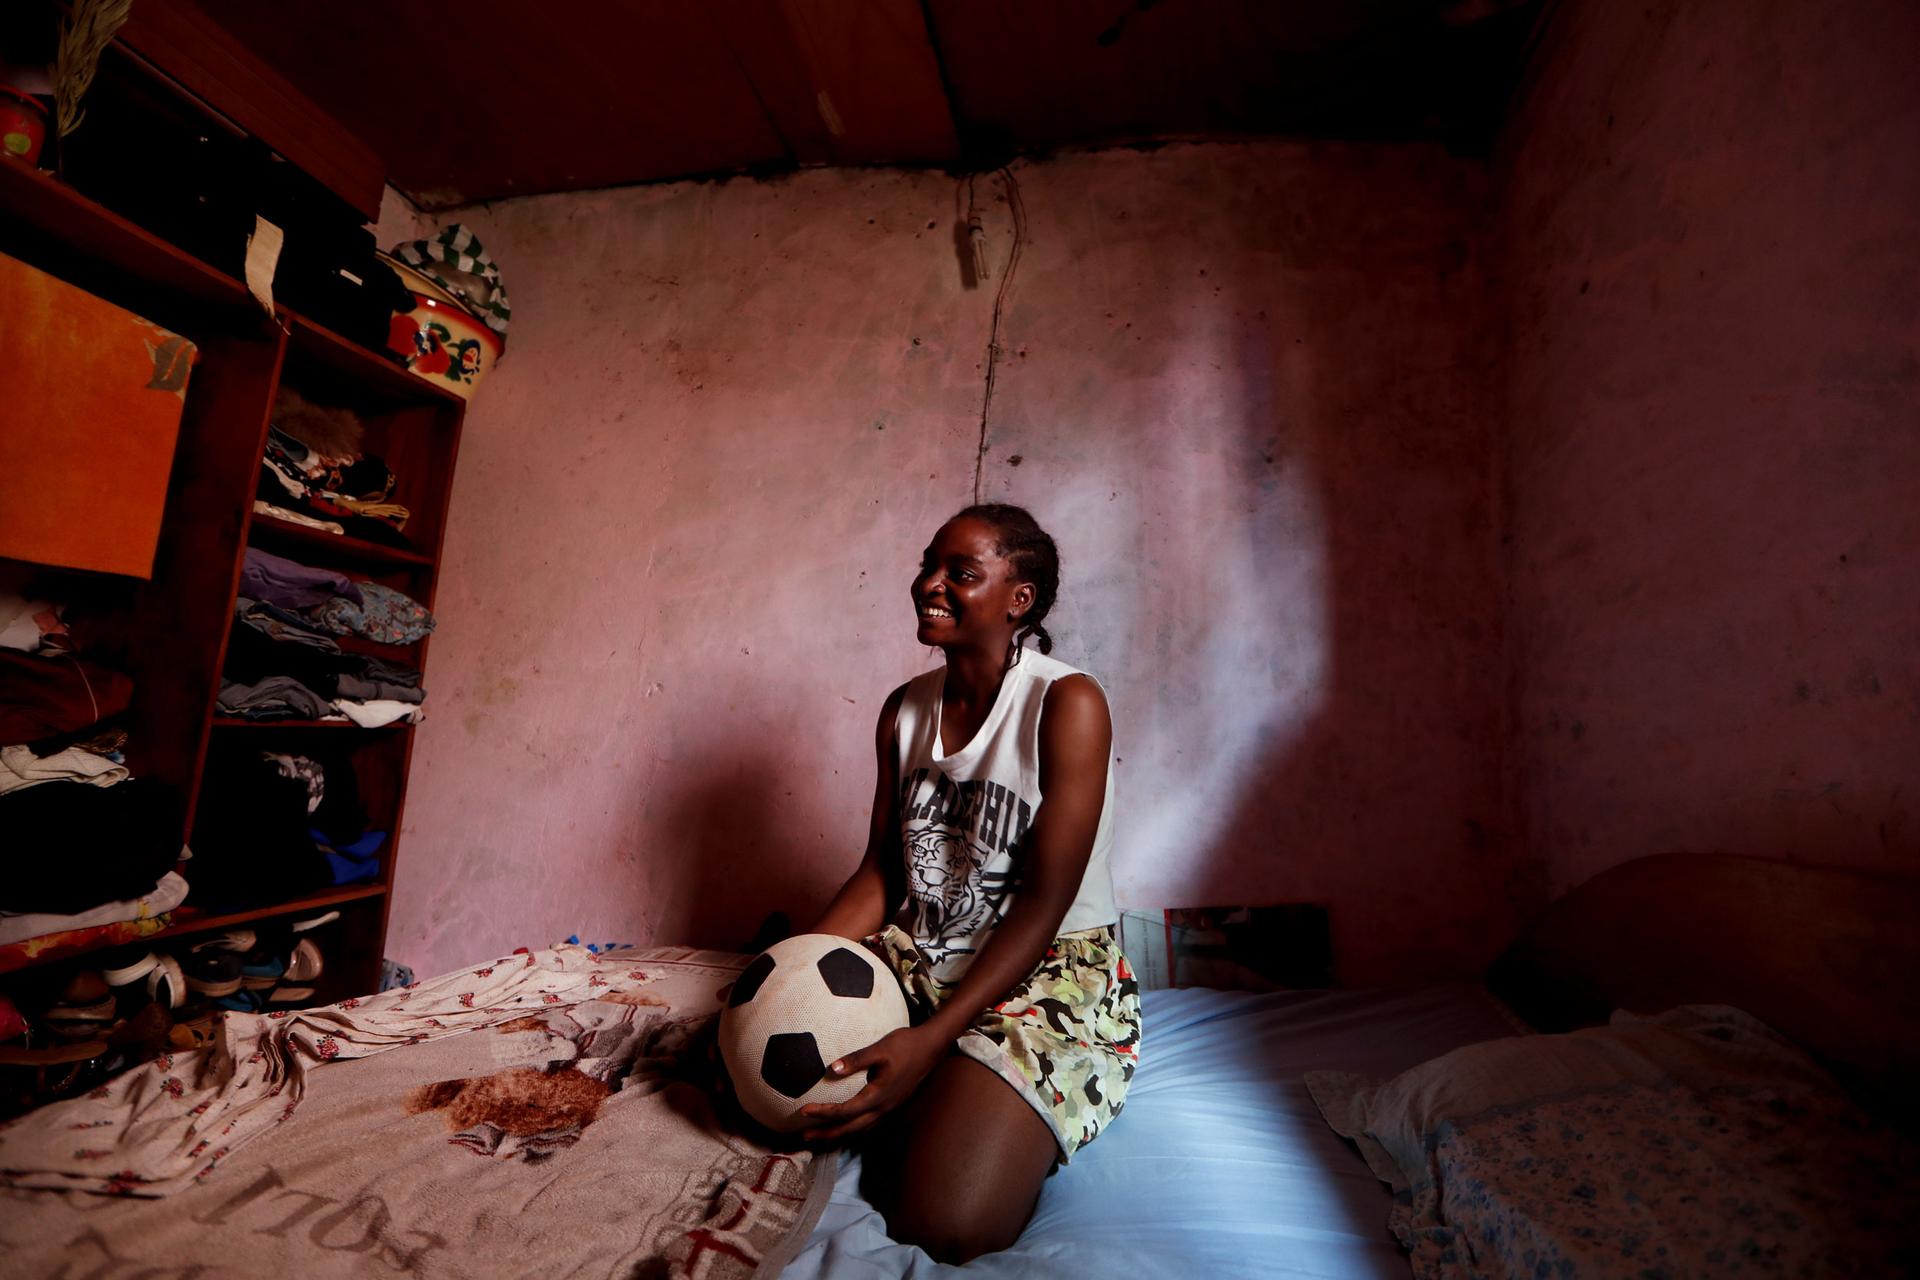 A young woman is shown sitting on her bed holding a soccer ball.